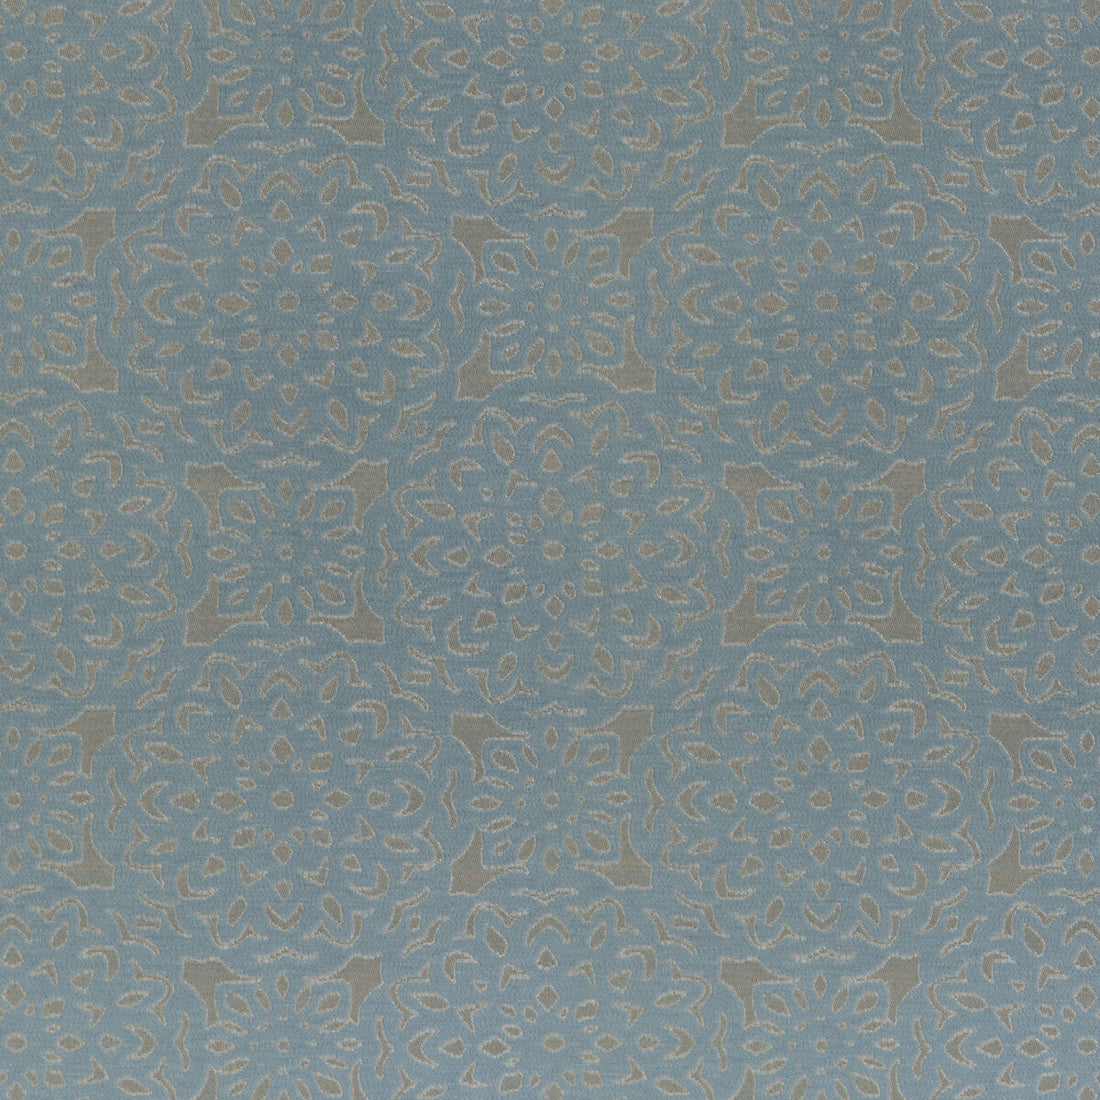 Garden Wall fabric in mystic color - pattern 37069.1516.0 - by Kravet Contract in the Chesapeake collection